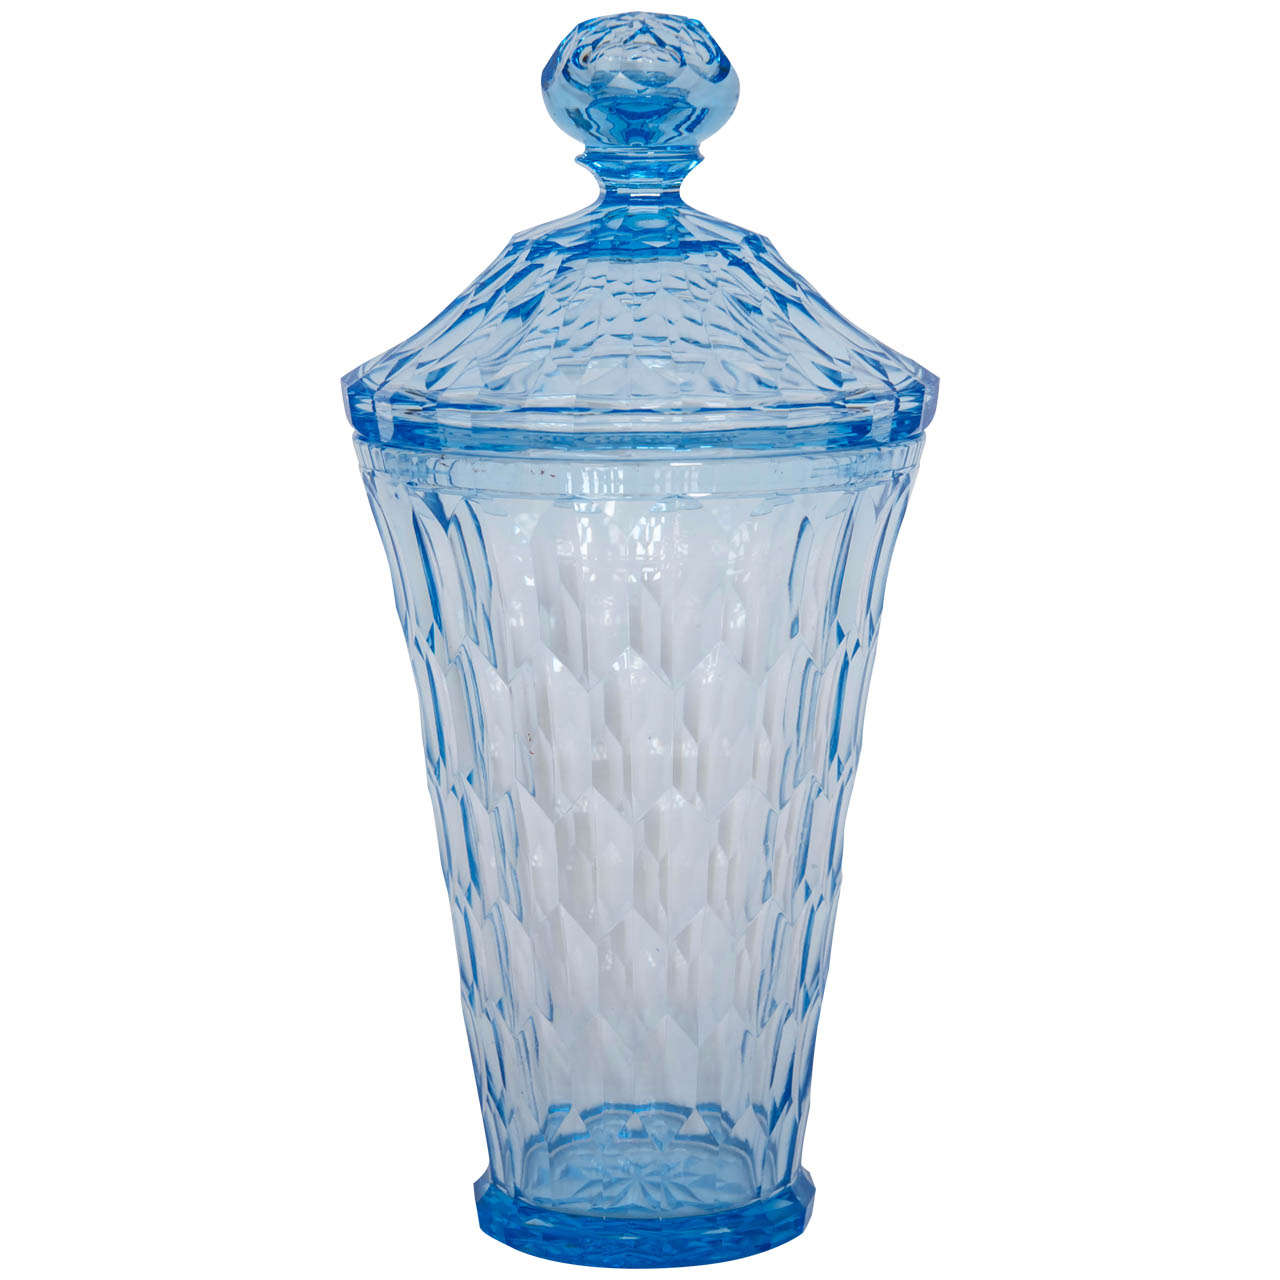 1920s Cut Glass Vase and Cover Designed by Edward Hald for Orrefors For Sale